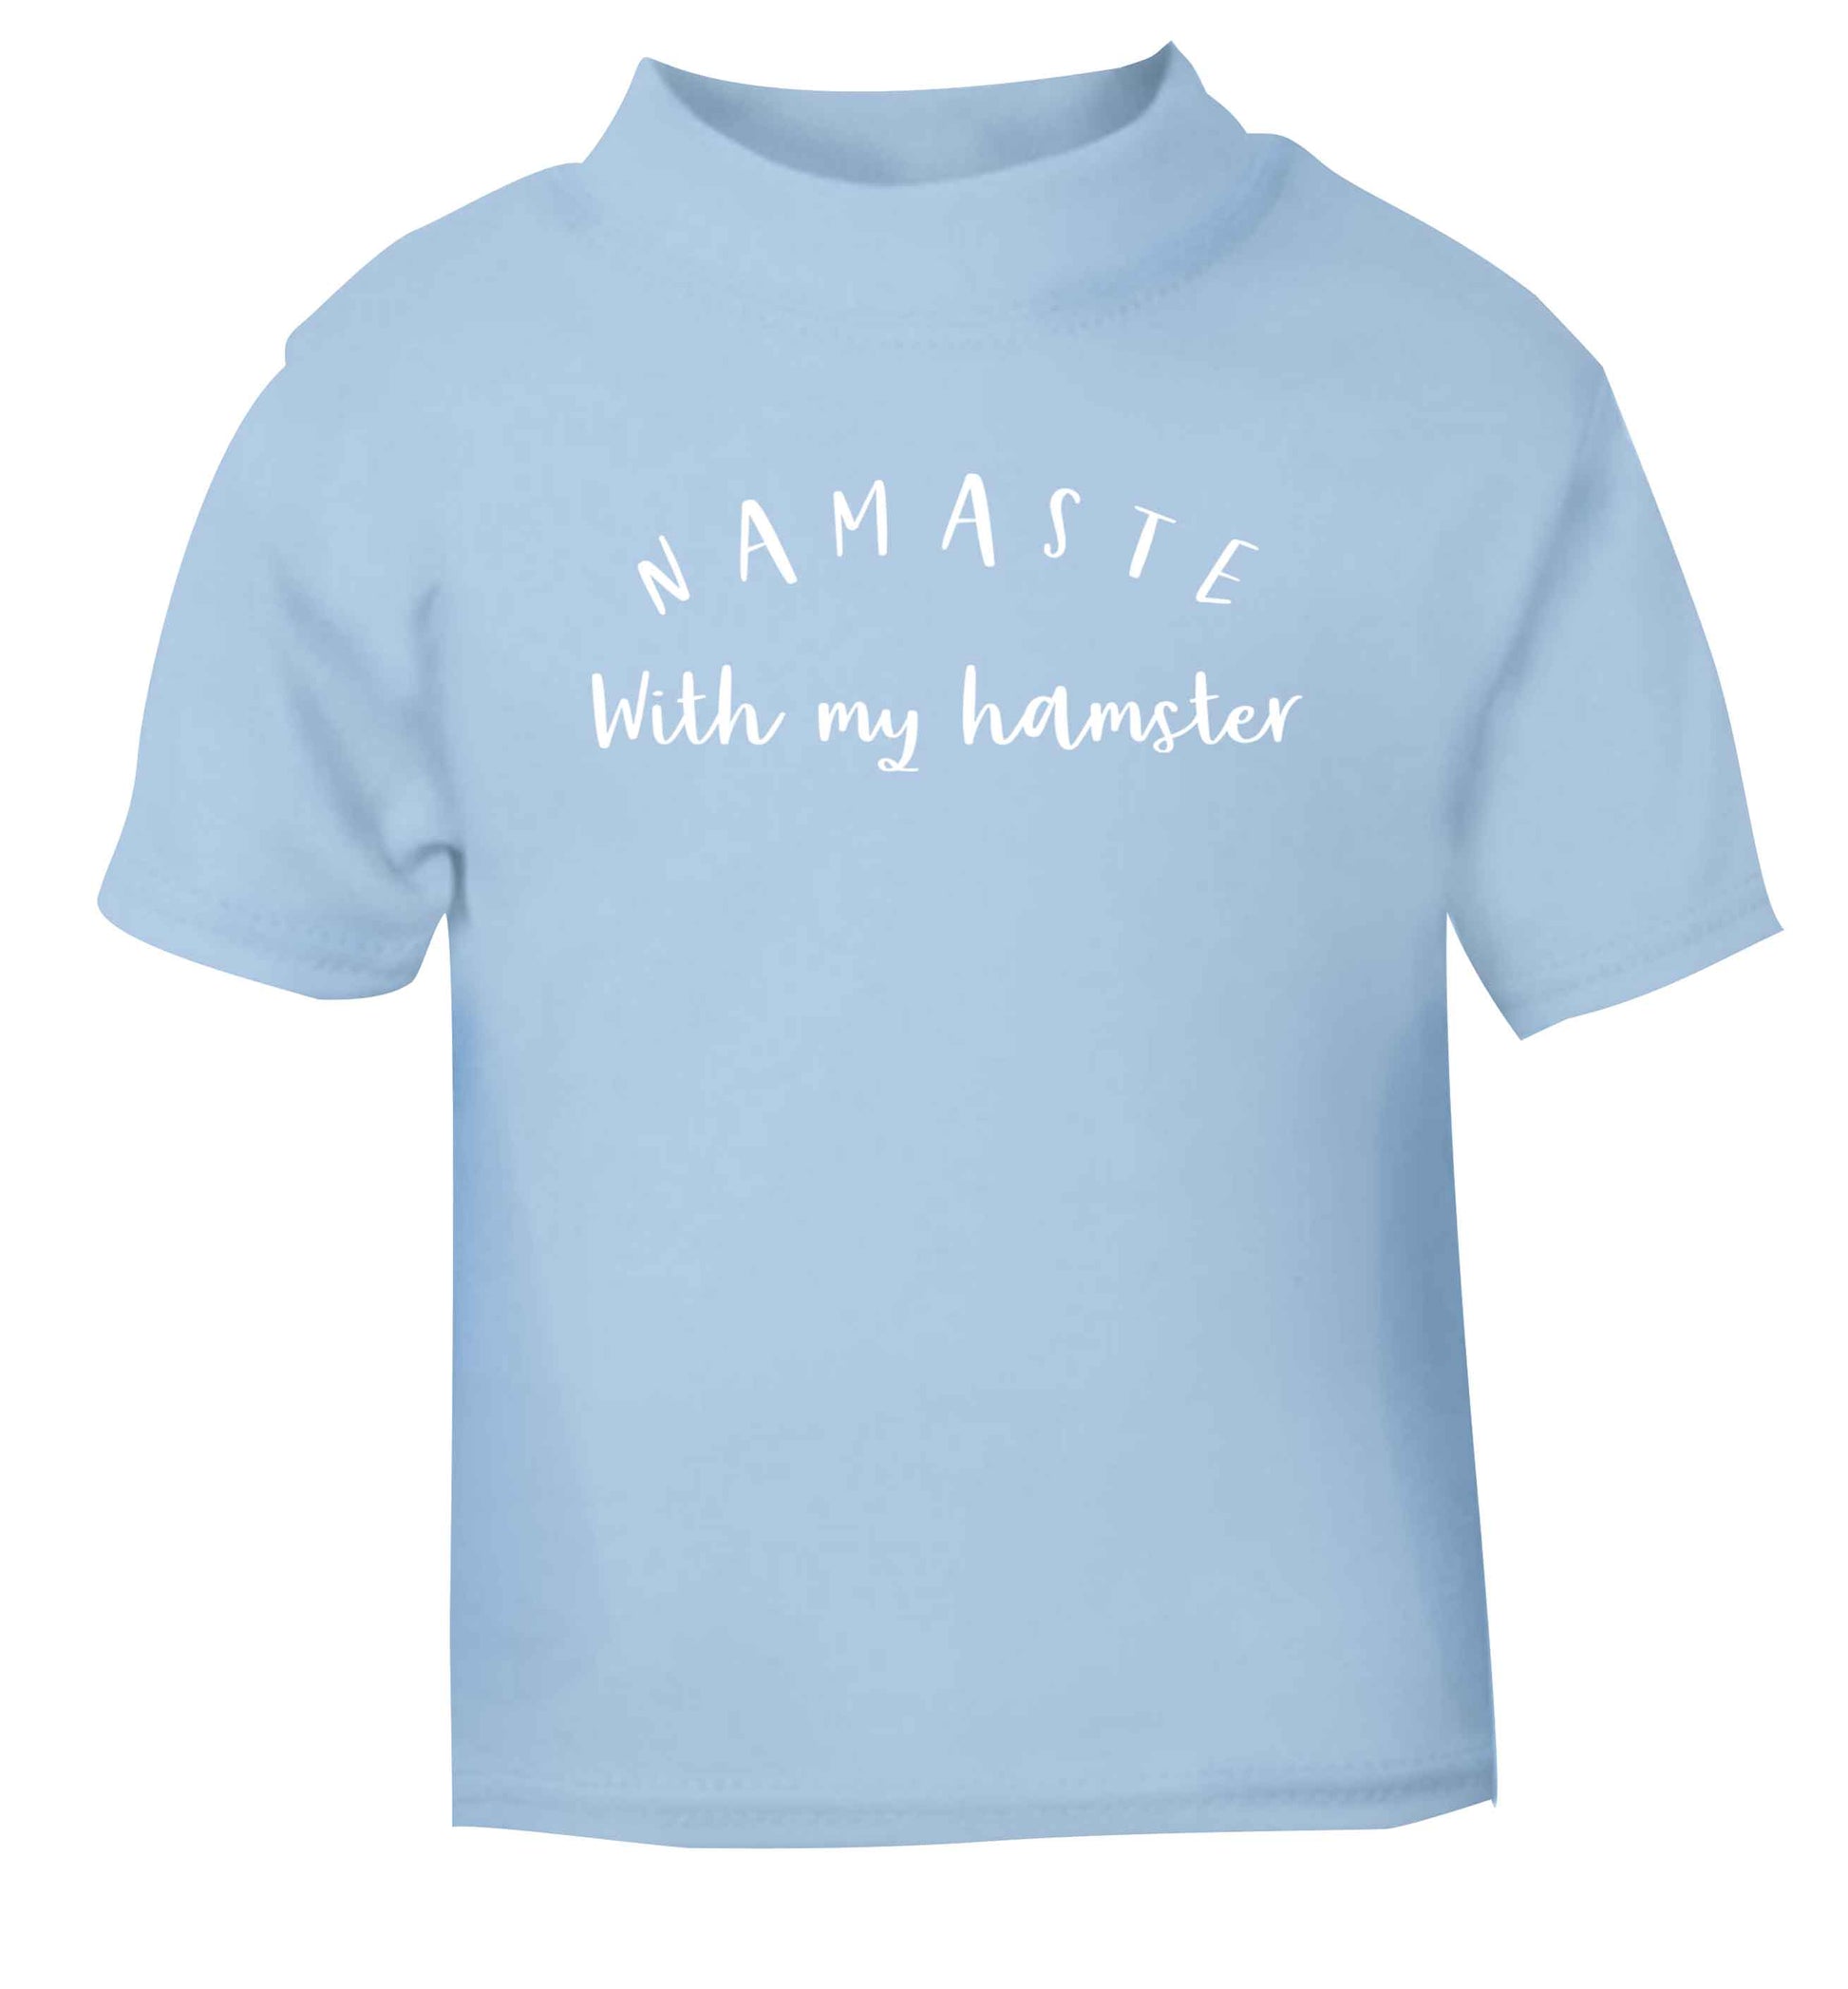 Namaste with my hamster light blue Baby Toddler Tshirt 2 Years